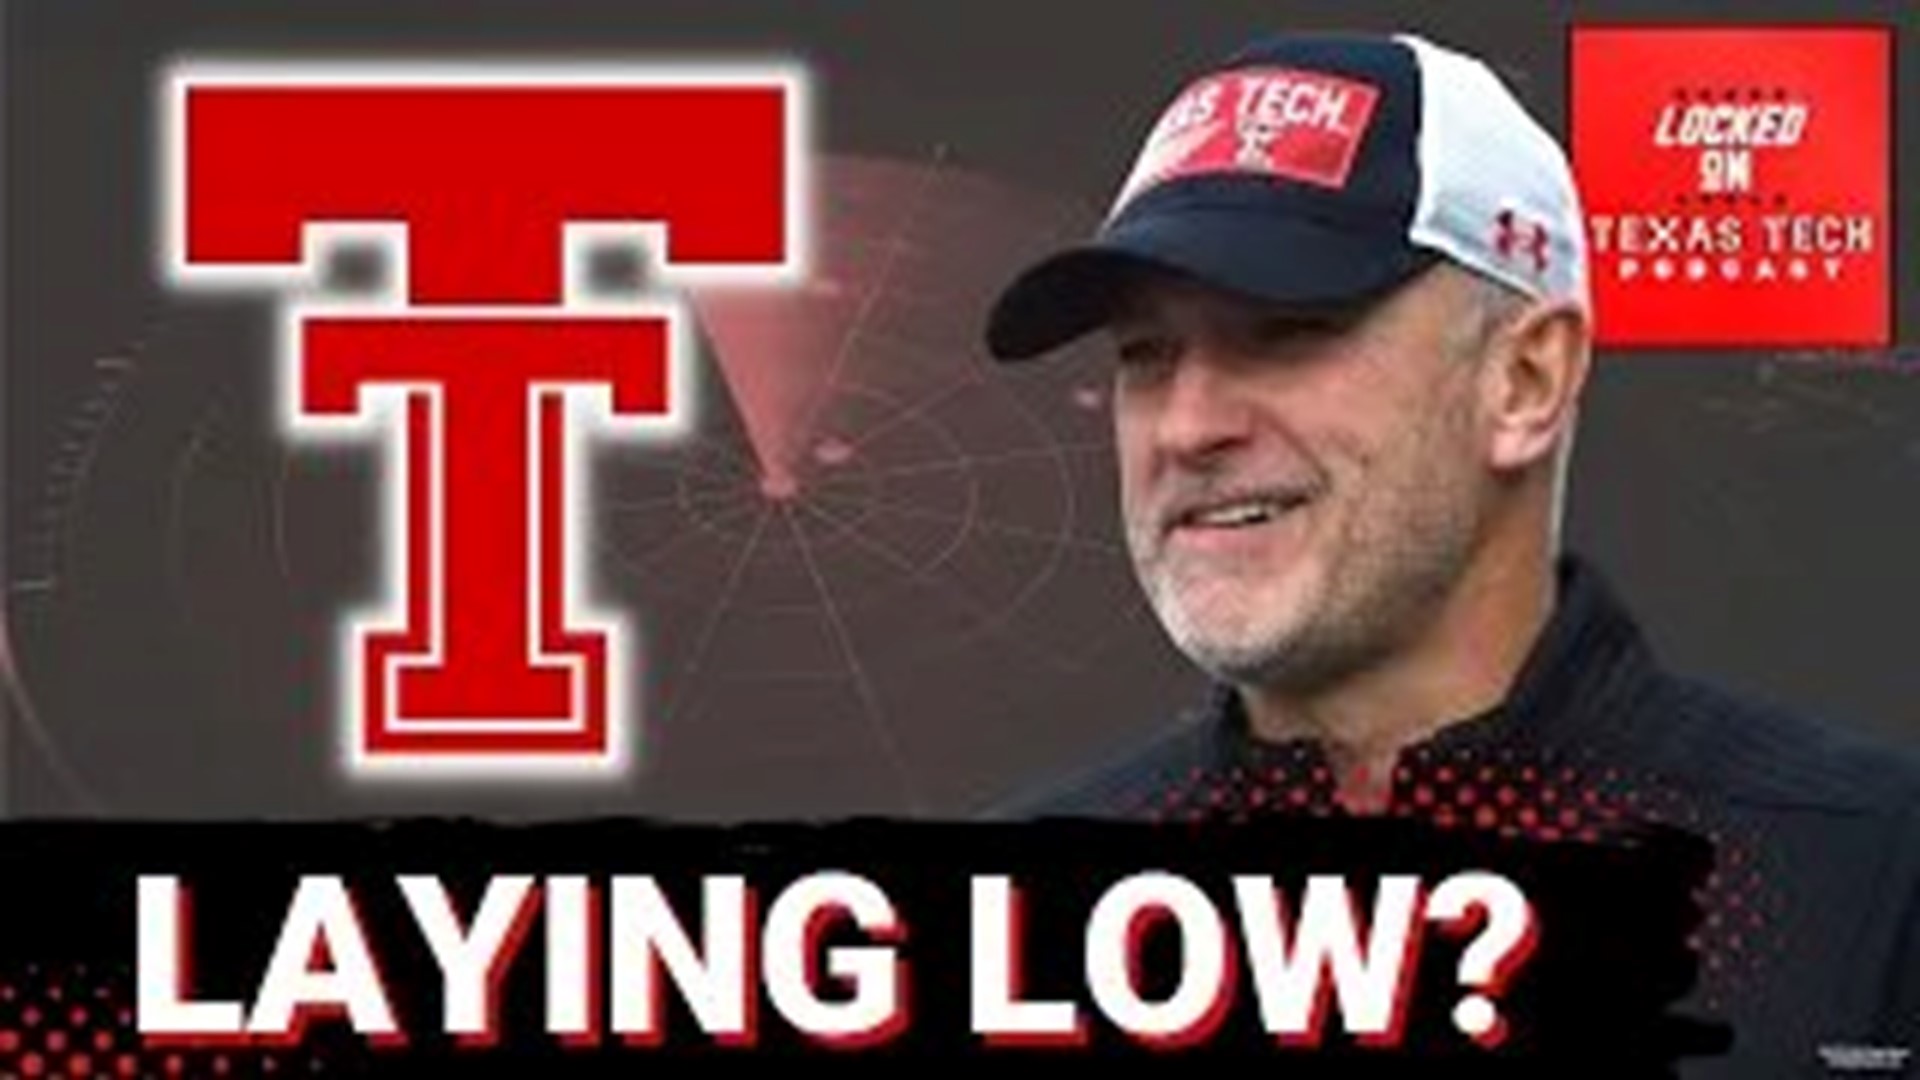 Today from Lubbock, TX, on Locked On Texas Tech:

- Red Raiders & the radar
- tight ends, Conyers, Miller
- latest from Lexington

All coming up on Locked On TT.